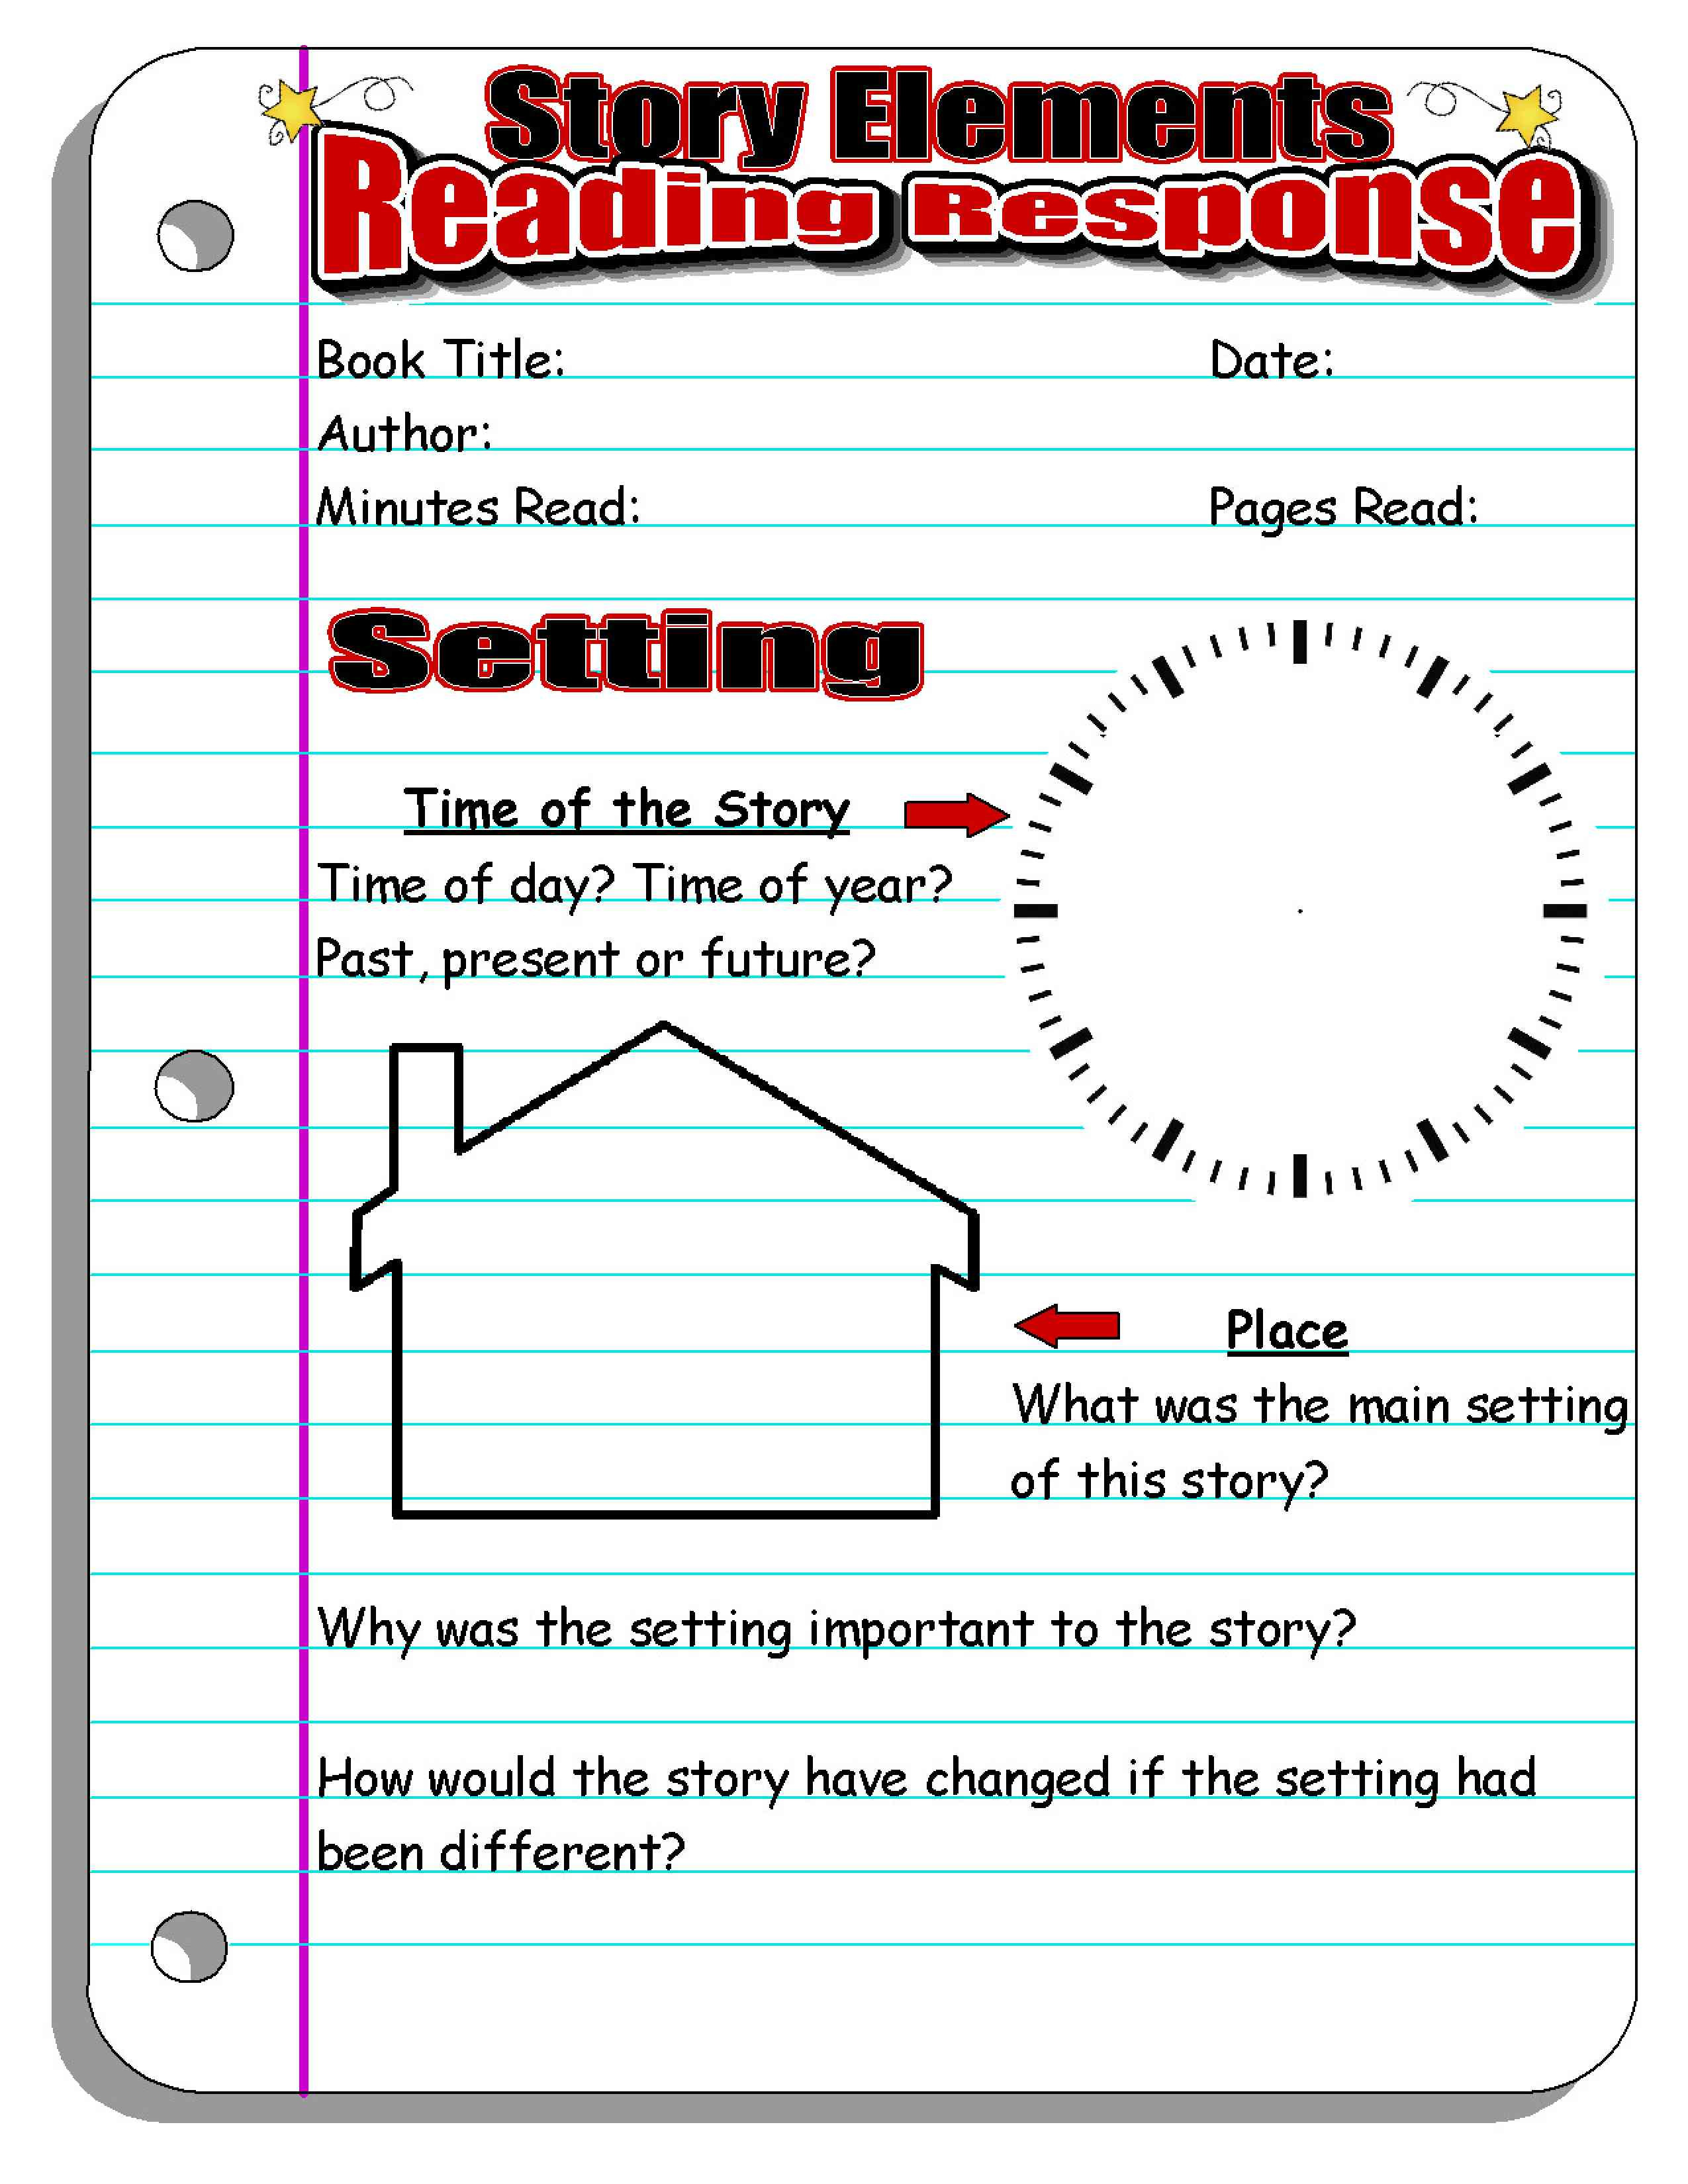 Summary Worksheets 2nd Grade Reading Response forms and Graphic organizers